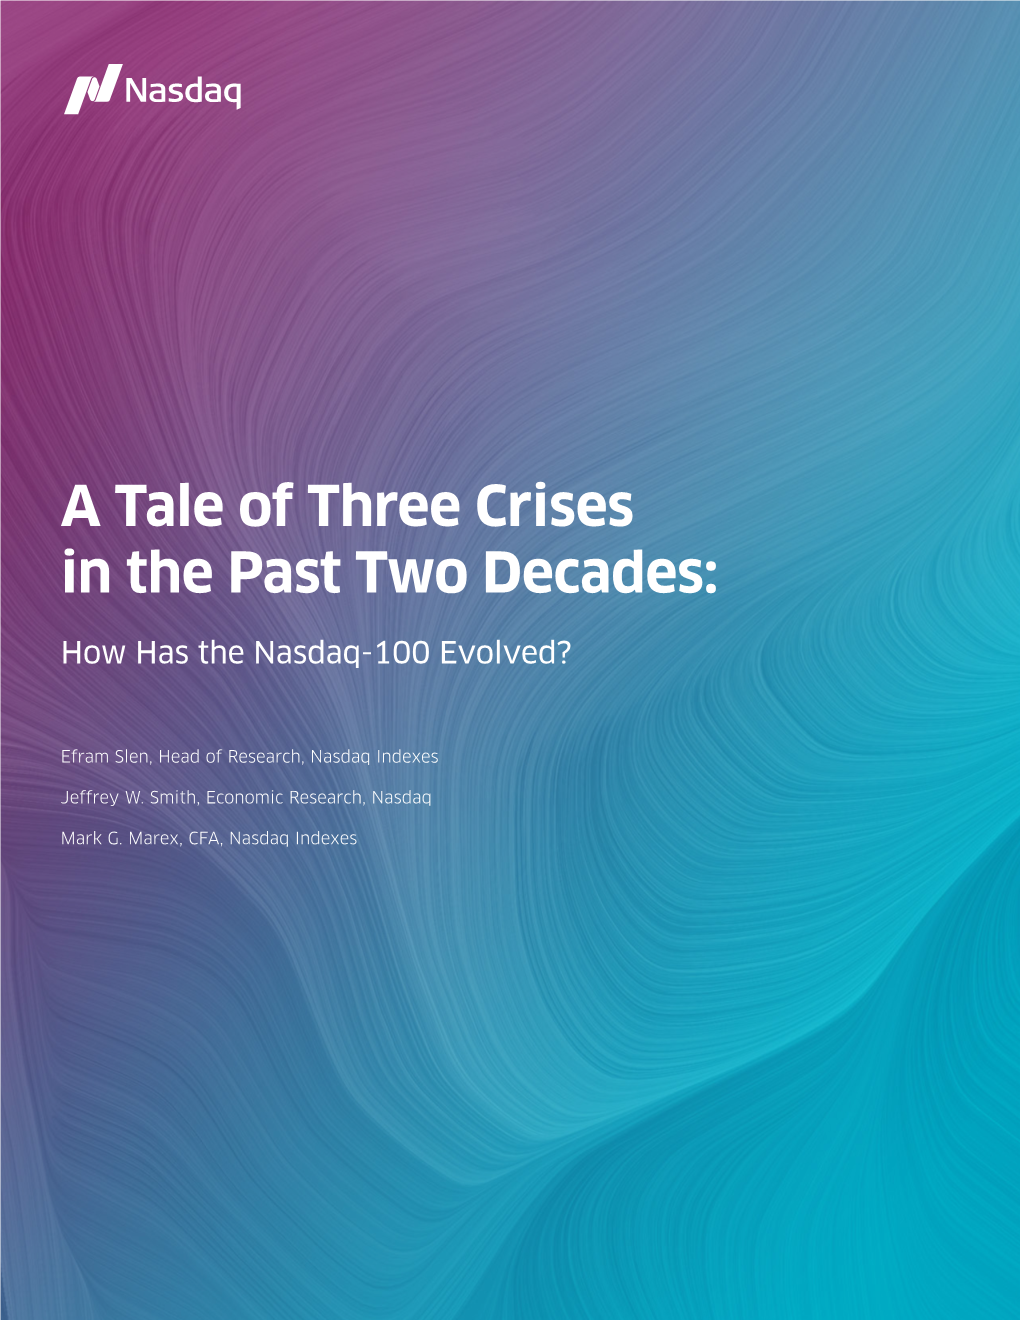 A Tale of Three Crises in the Past Two Decades